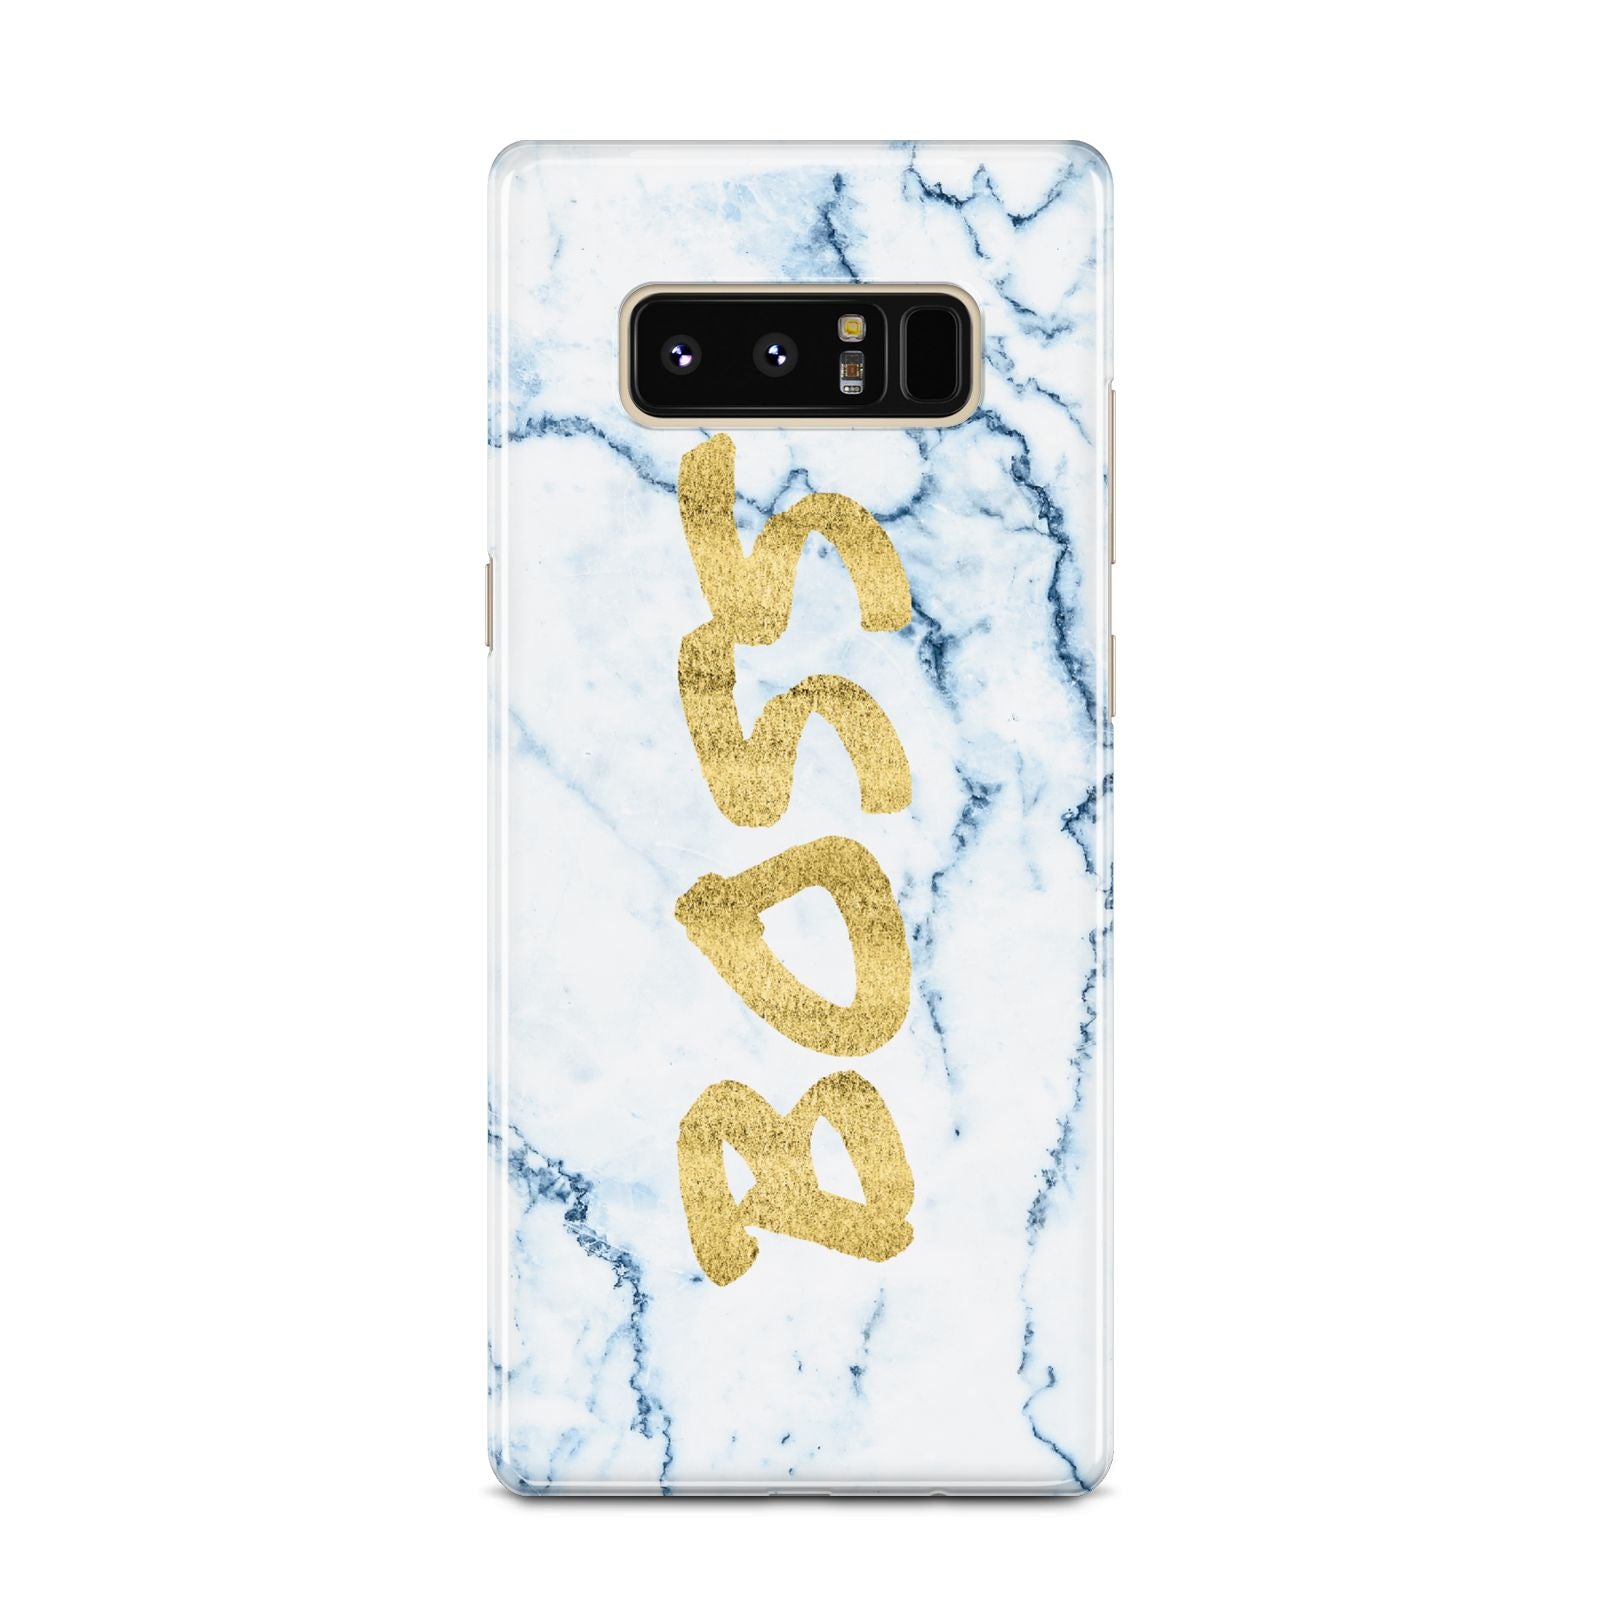 Boss Gold Blue Marble Effect Samsung Galaxy Note 8 Case